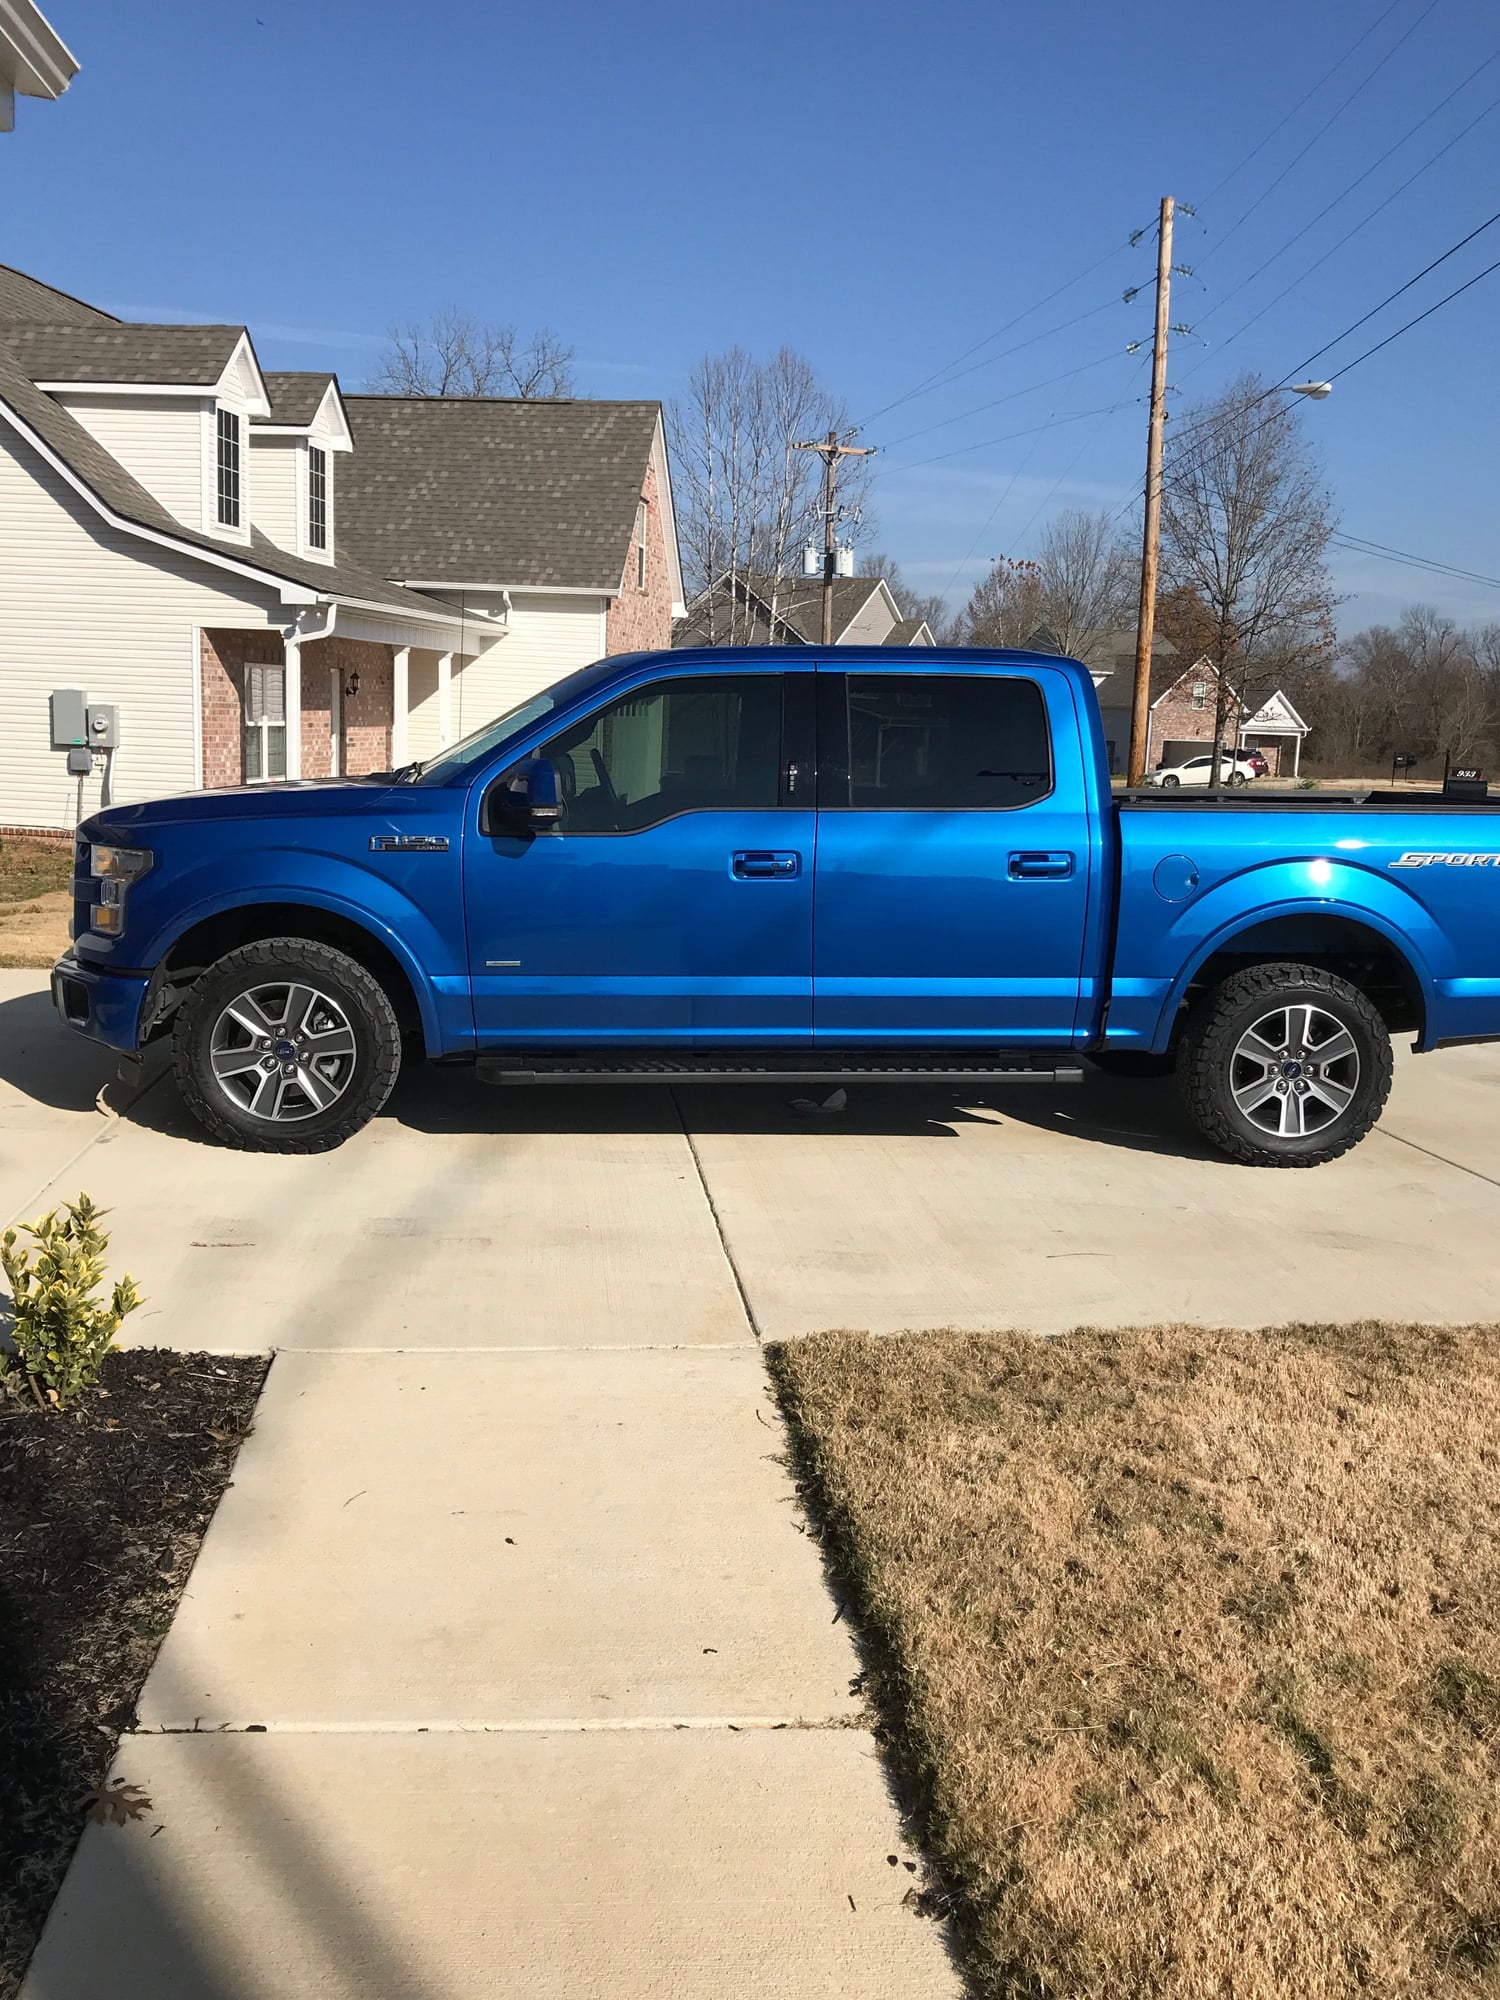 2015 Lariat vibration issue- looking for info - Ford F150 Forum 2015 Ford F150 Vibration At Highway Speeds